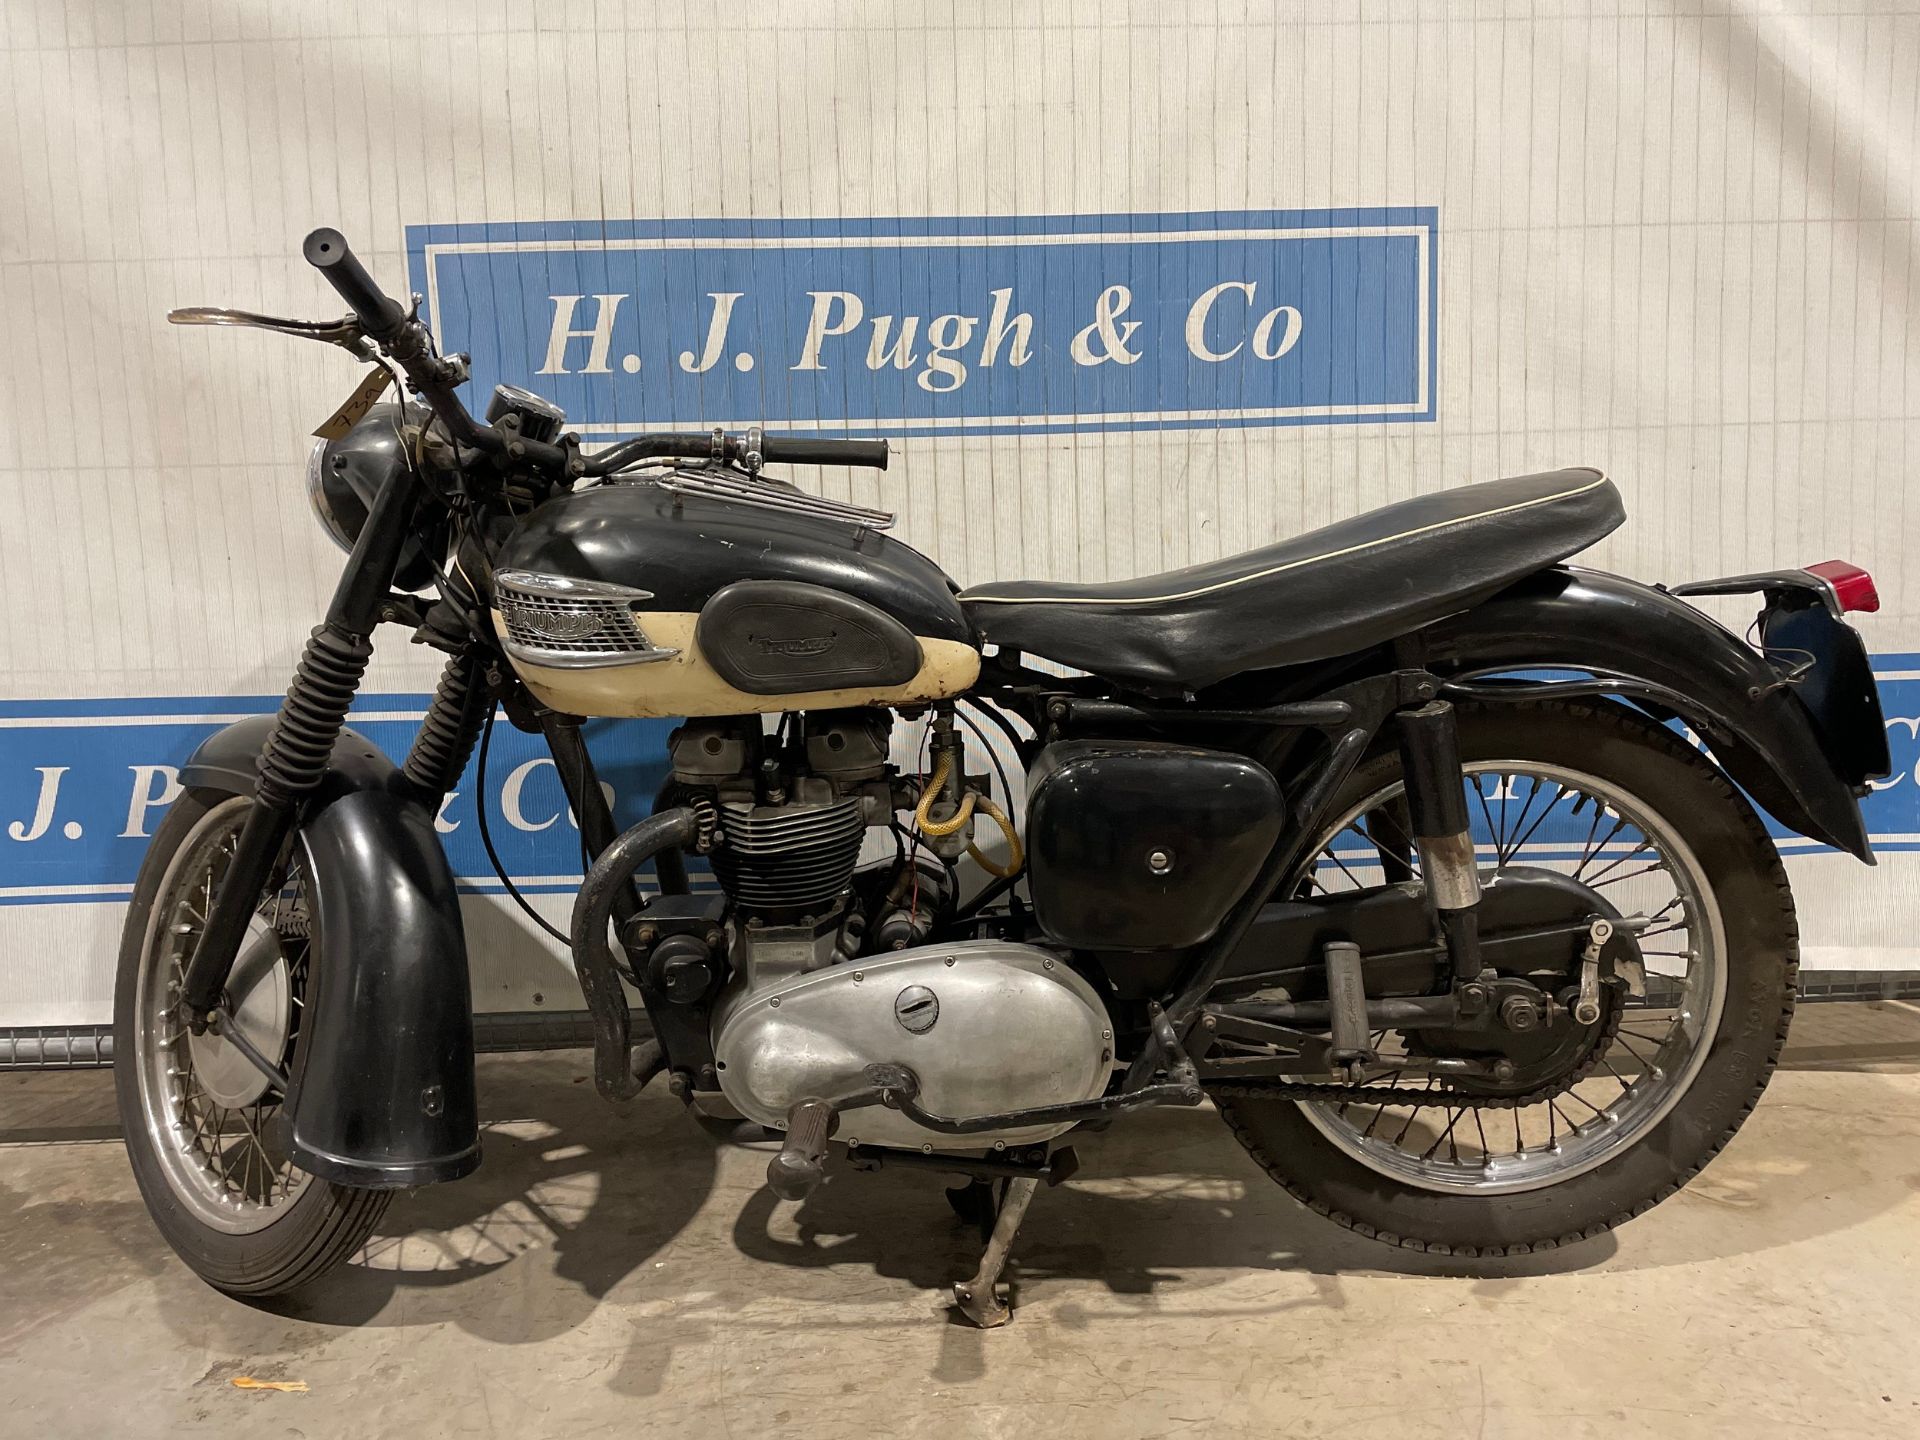 Triumph T110 motorcycle. 1958. 650cc. Easy to ride. C/w some history. Reg 354 XVT. V5 - Image 14 of 14